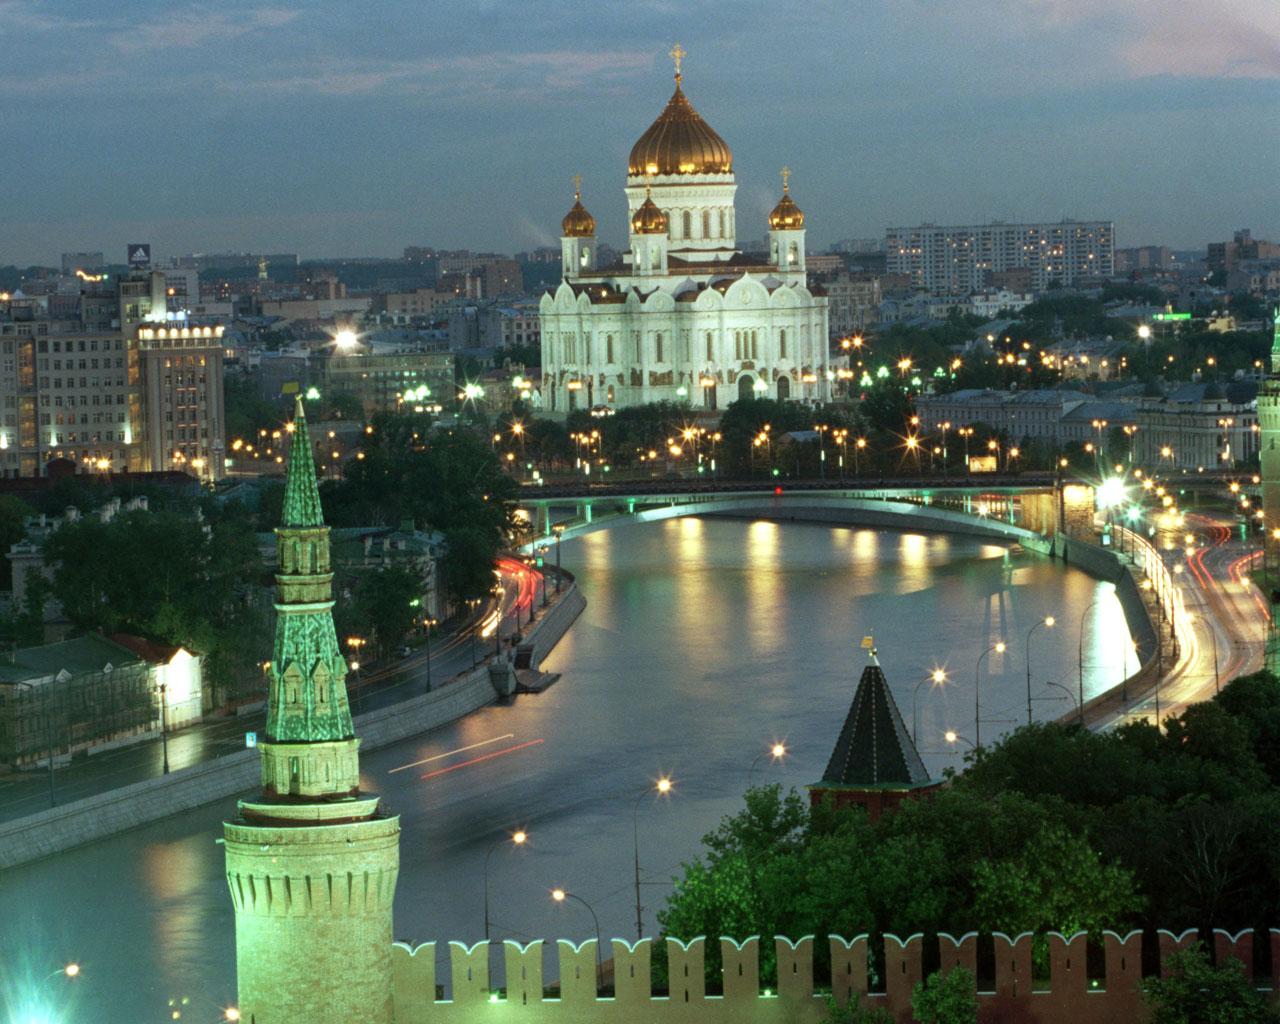 Moscow - Looking over Muskova River to the Cathedral of Christ the Saviour Wallpaper #2 1280 x 1024 